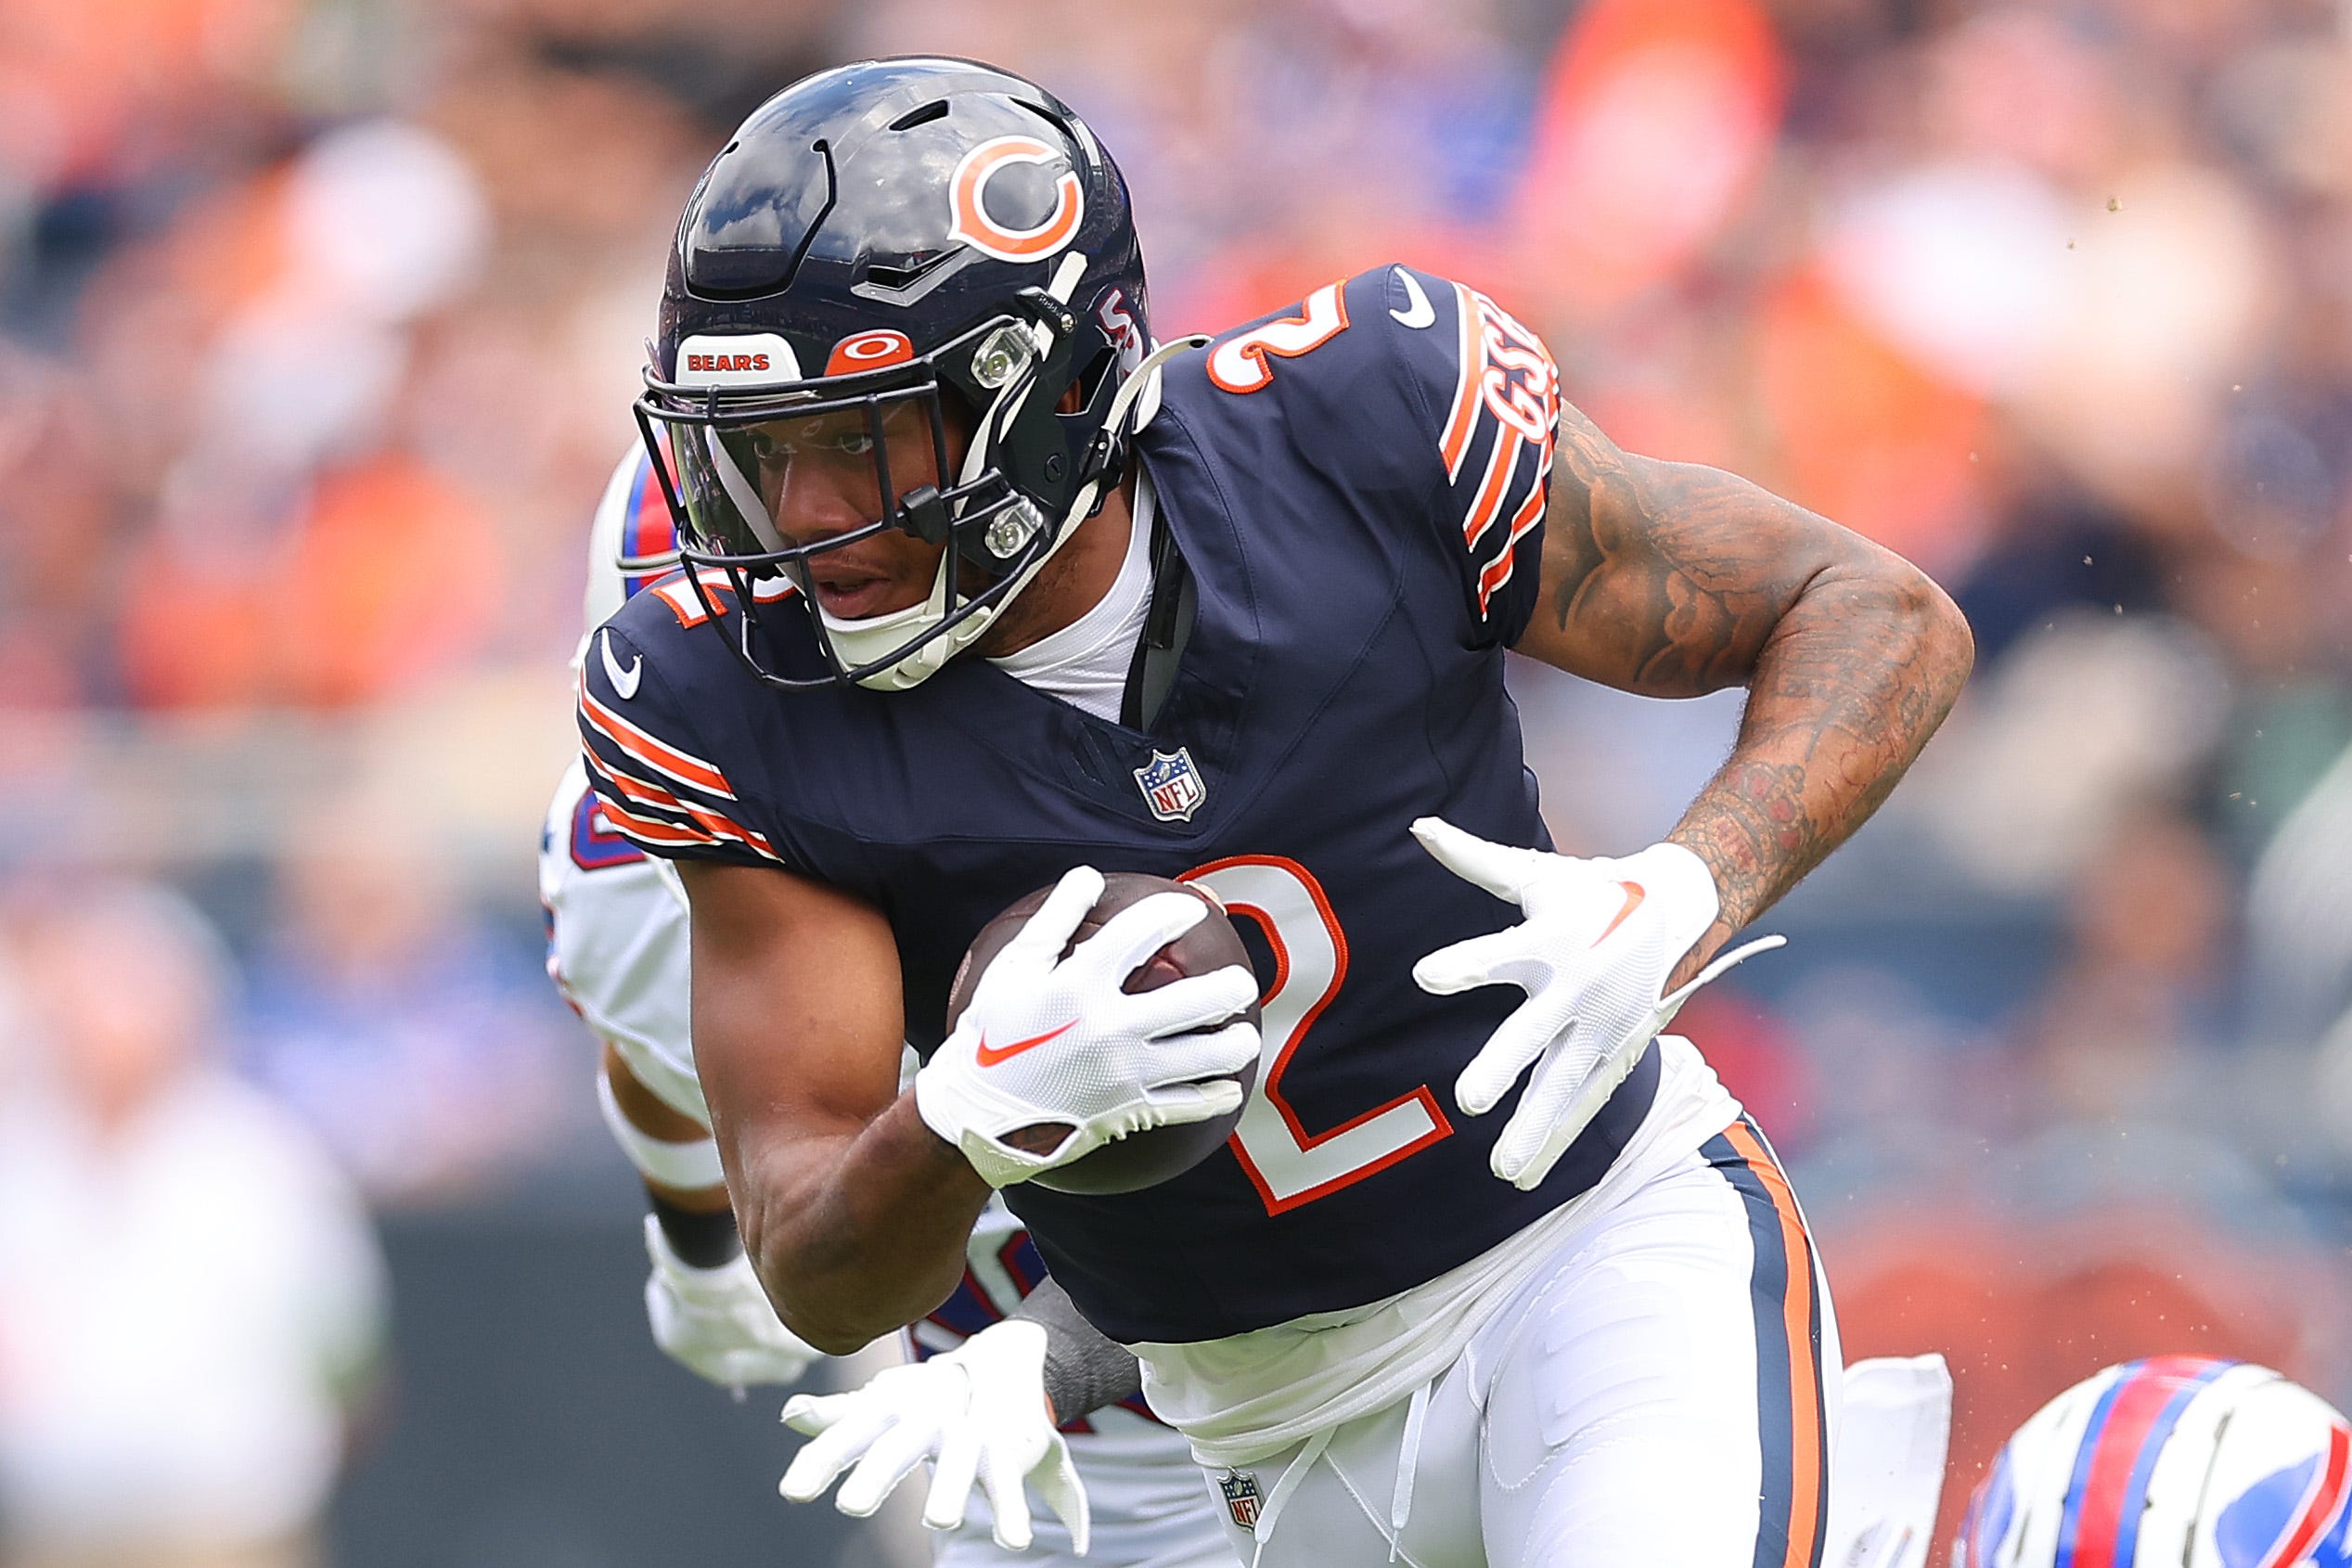 dj moore sounds off on new bears qb caleb williams after throwing session